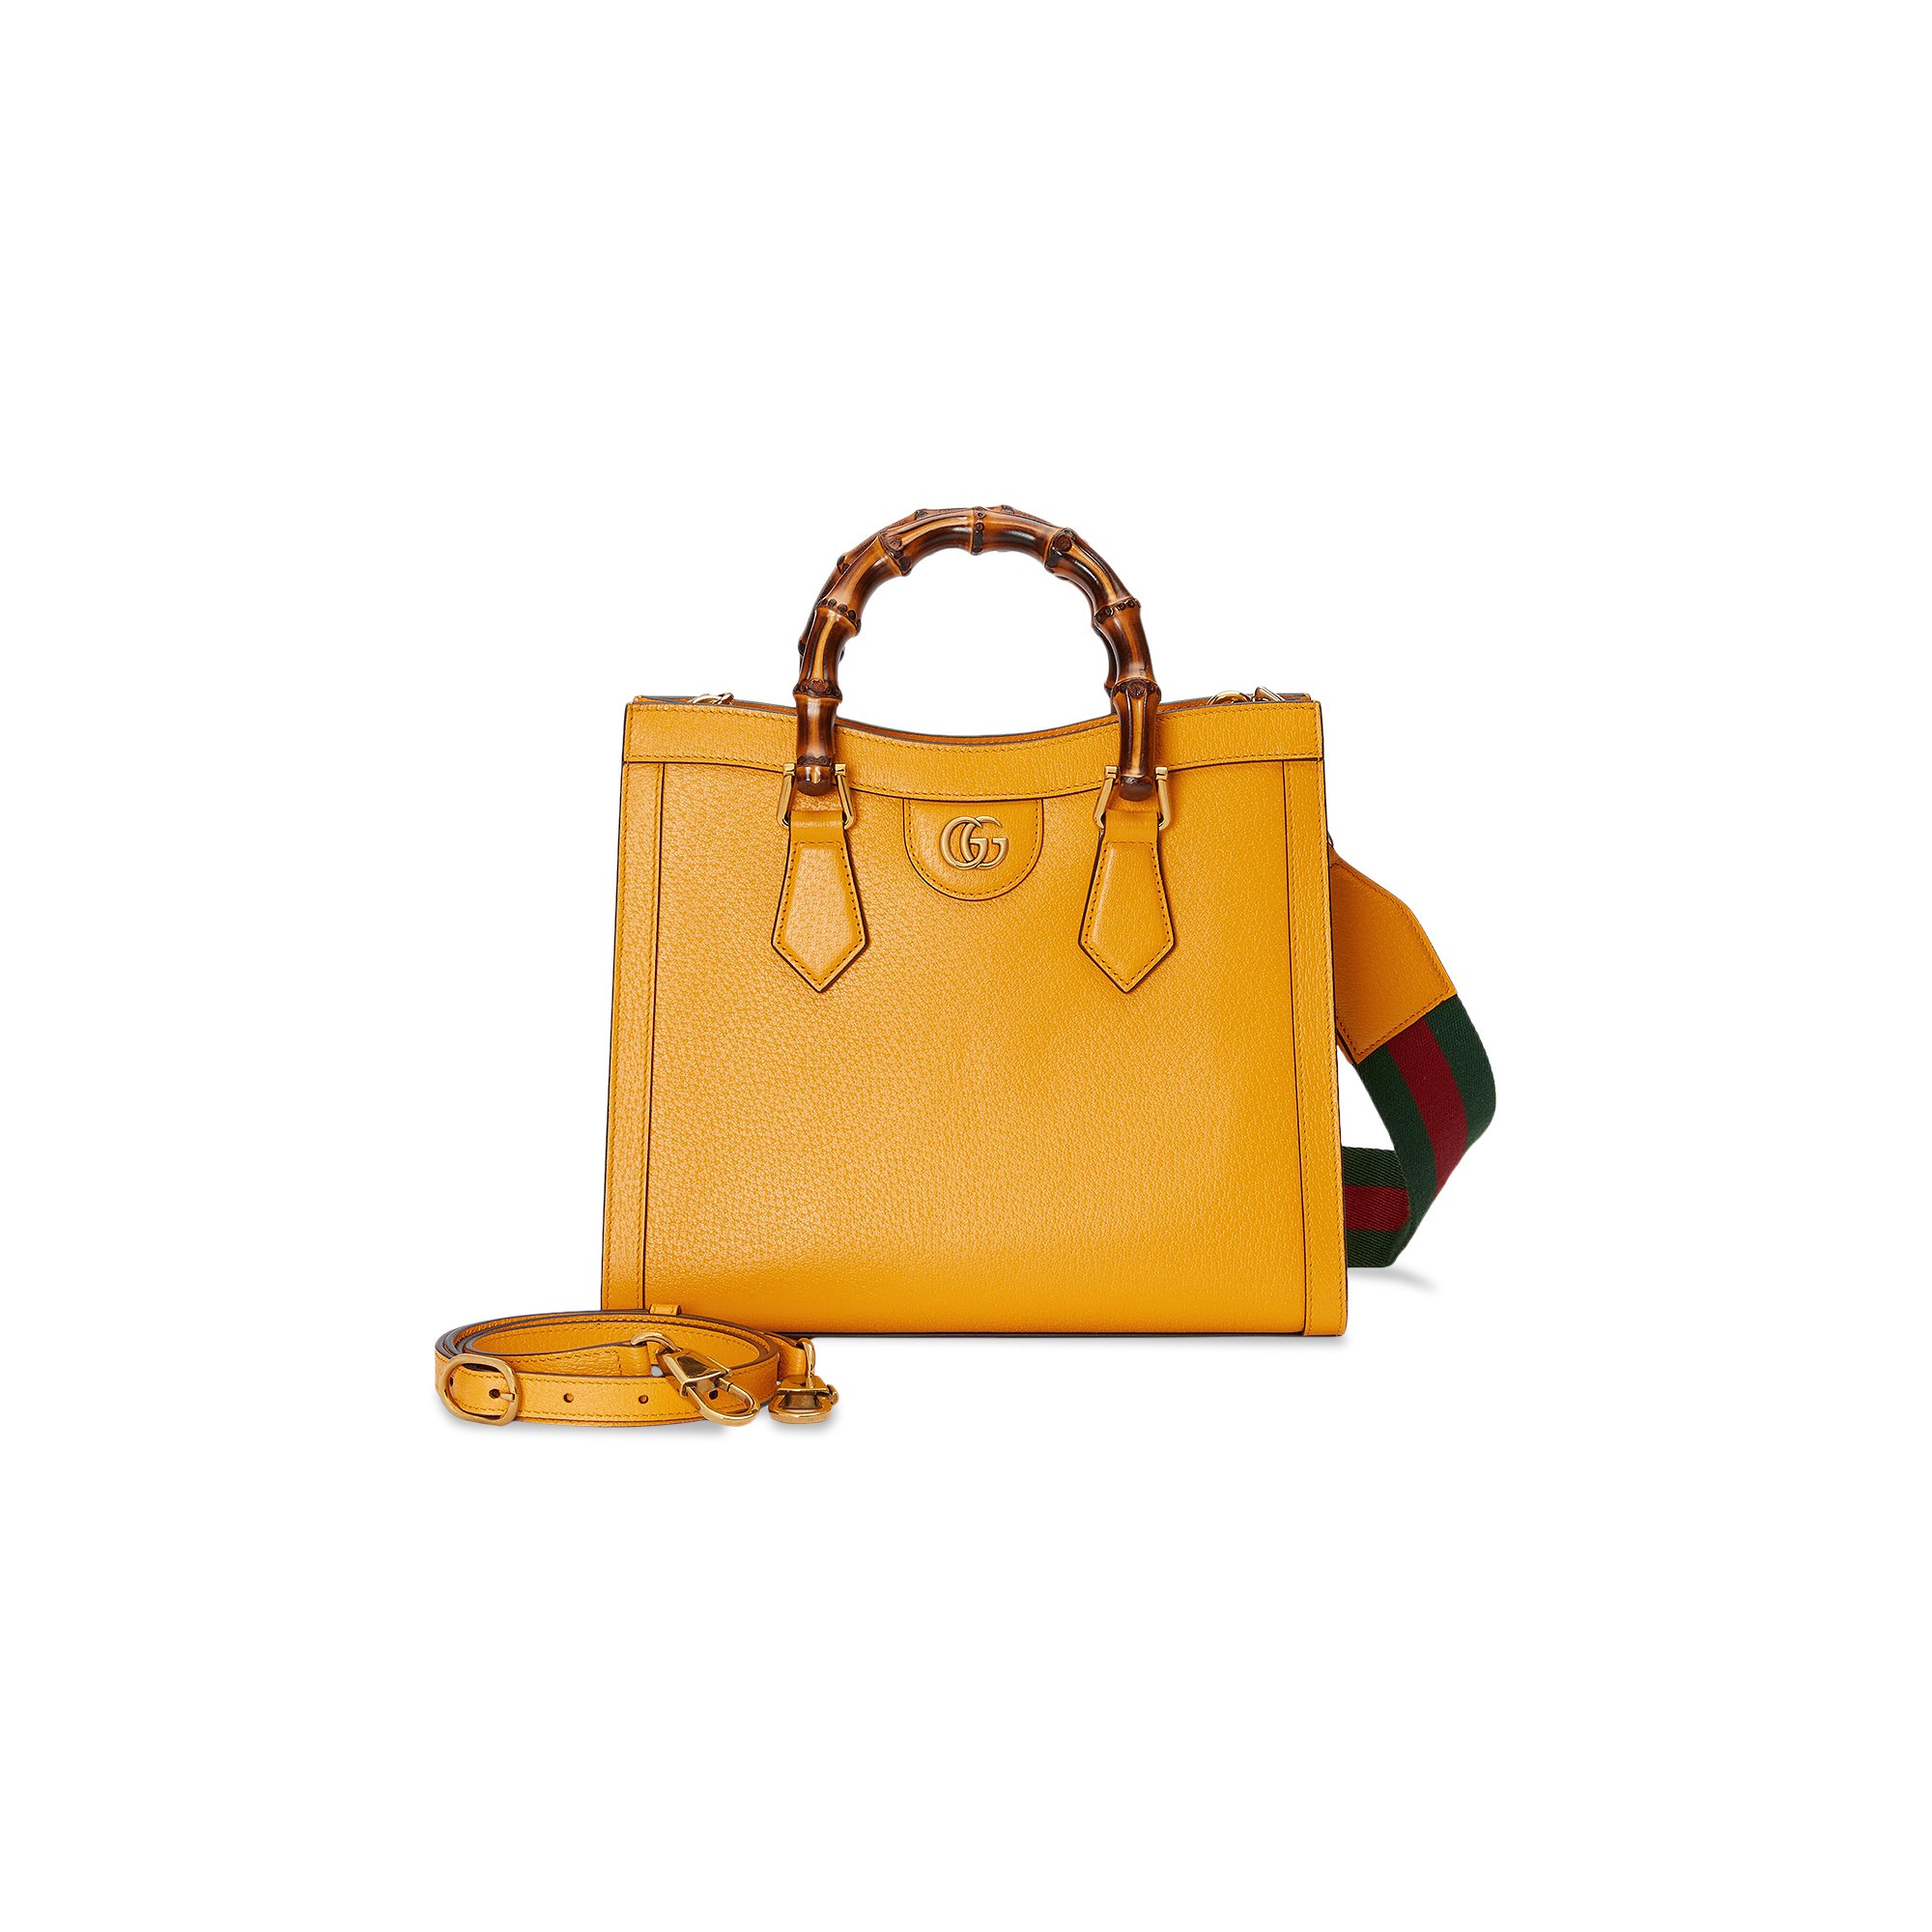 Buy Gucci Diana Small Tote Bag 'Yellow' - 702721 U3ZDT 7480 | GOAT